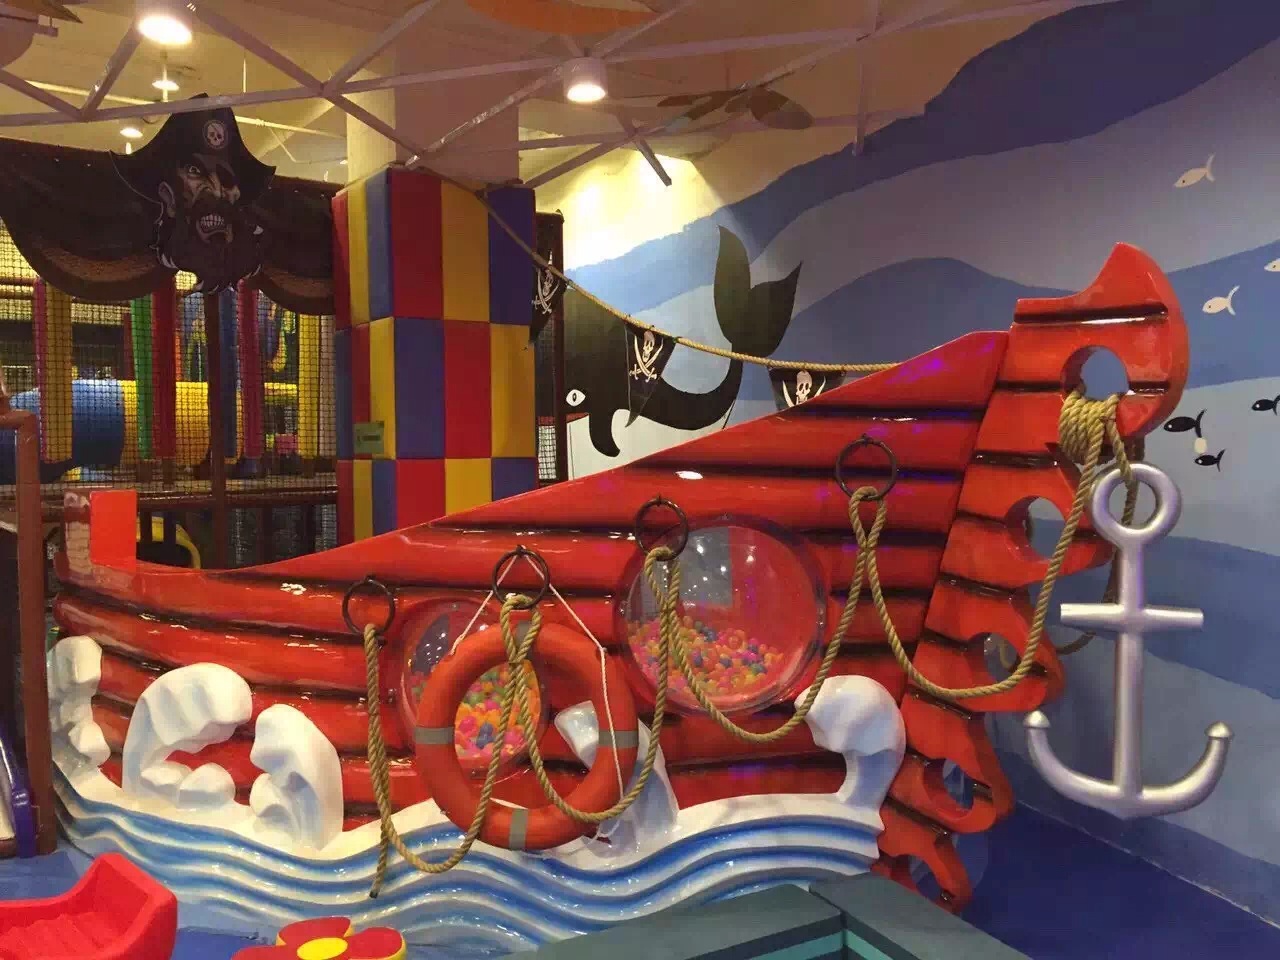 Classic Pirate Themed Kids Soft Play Area